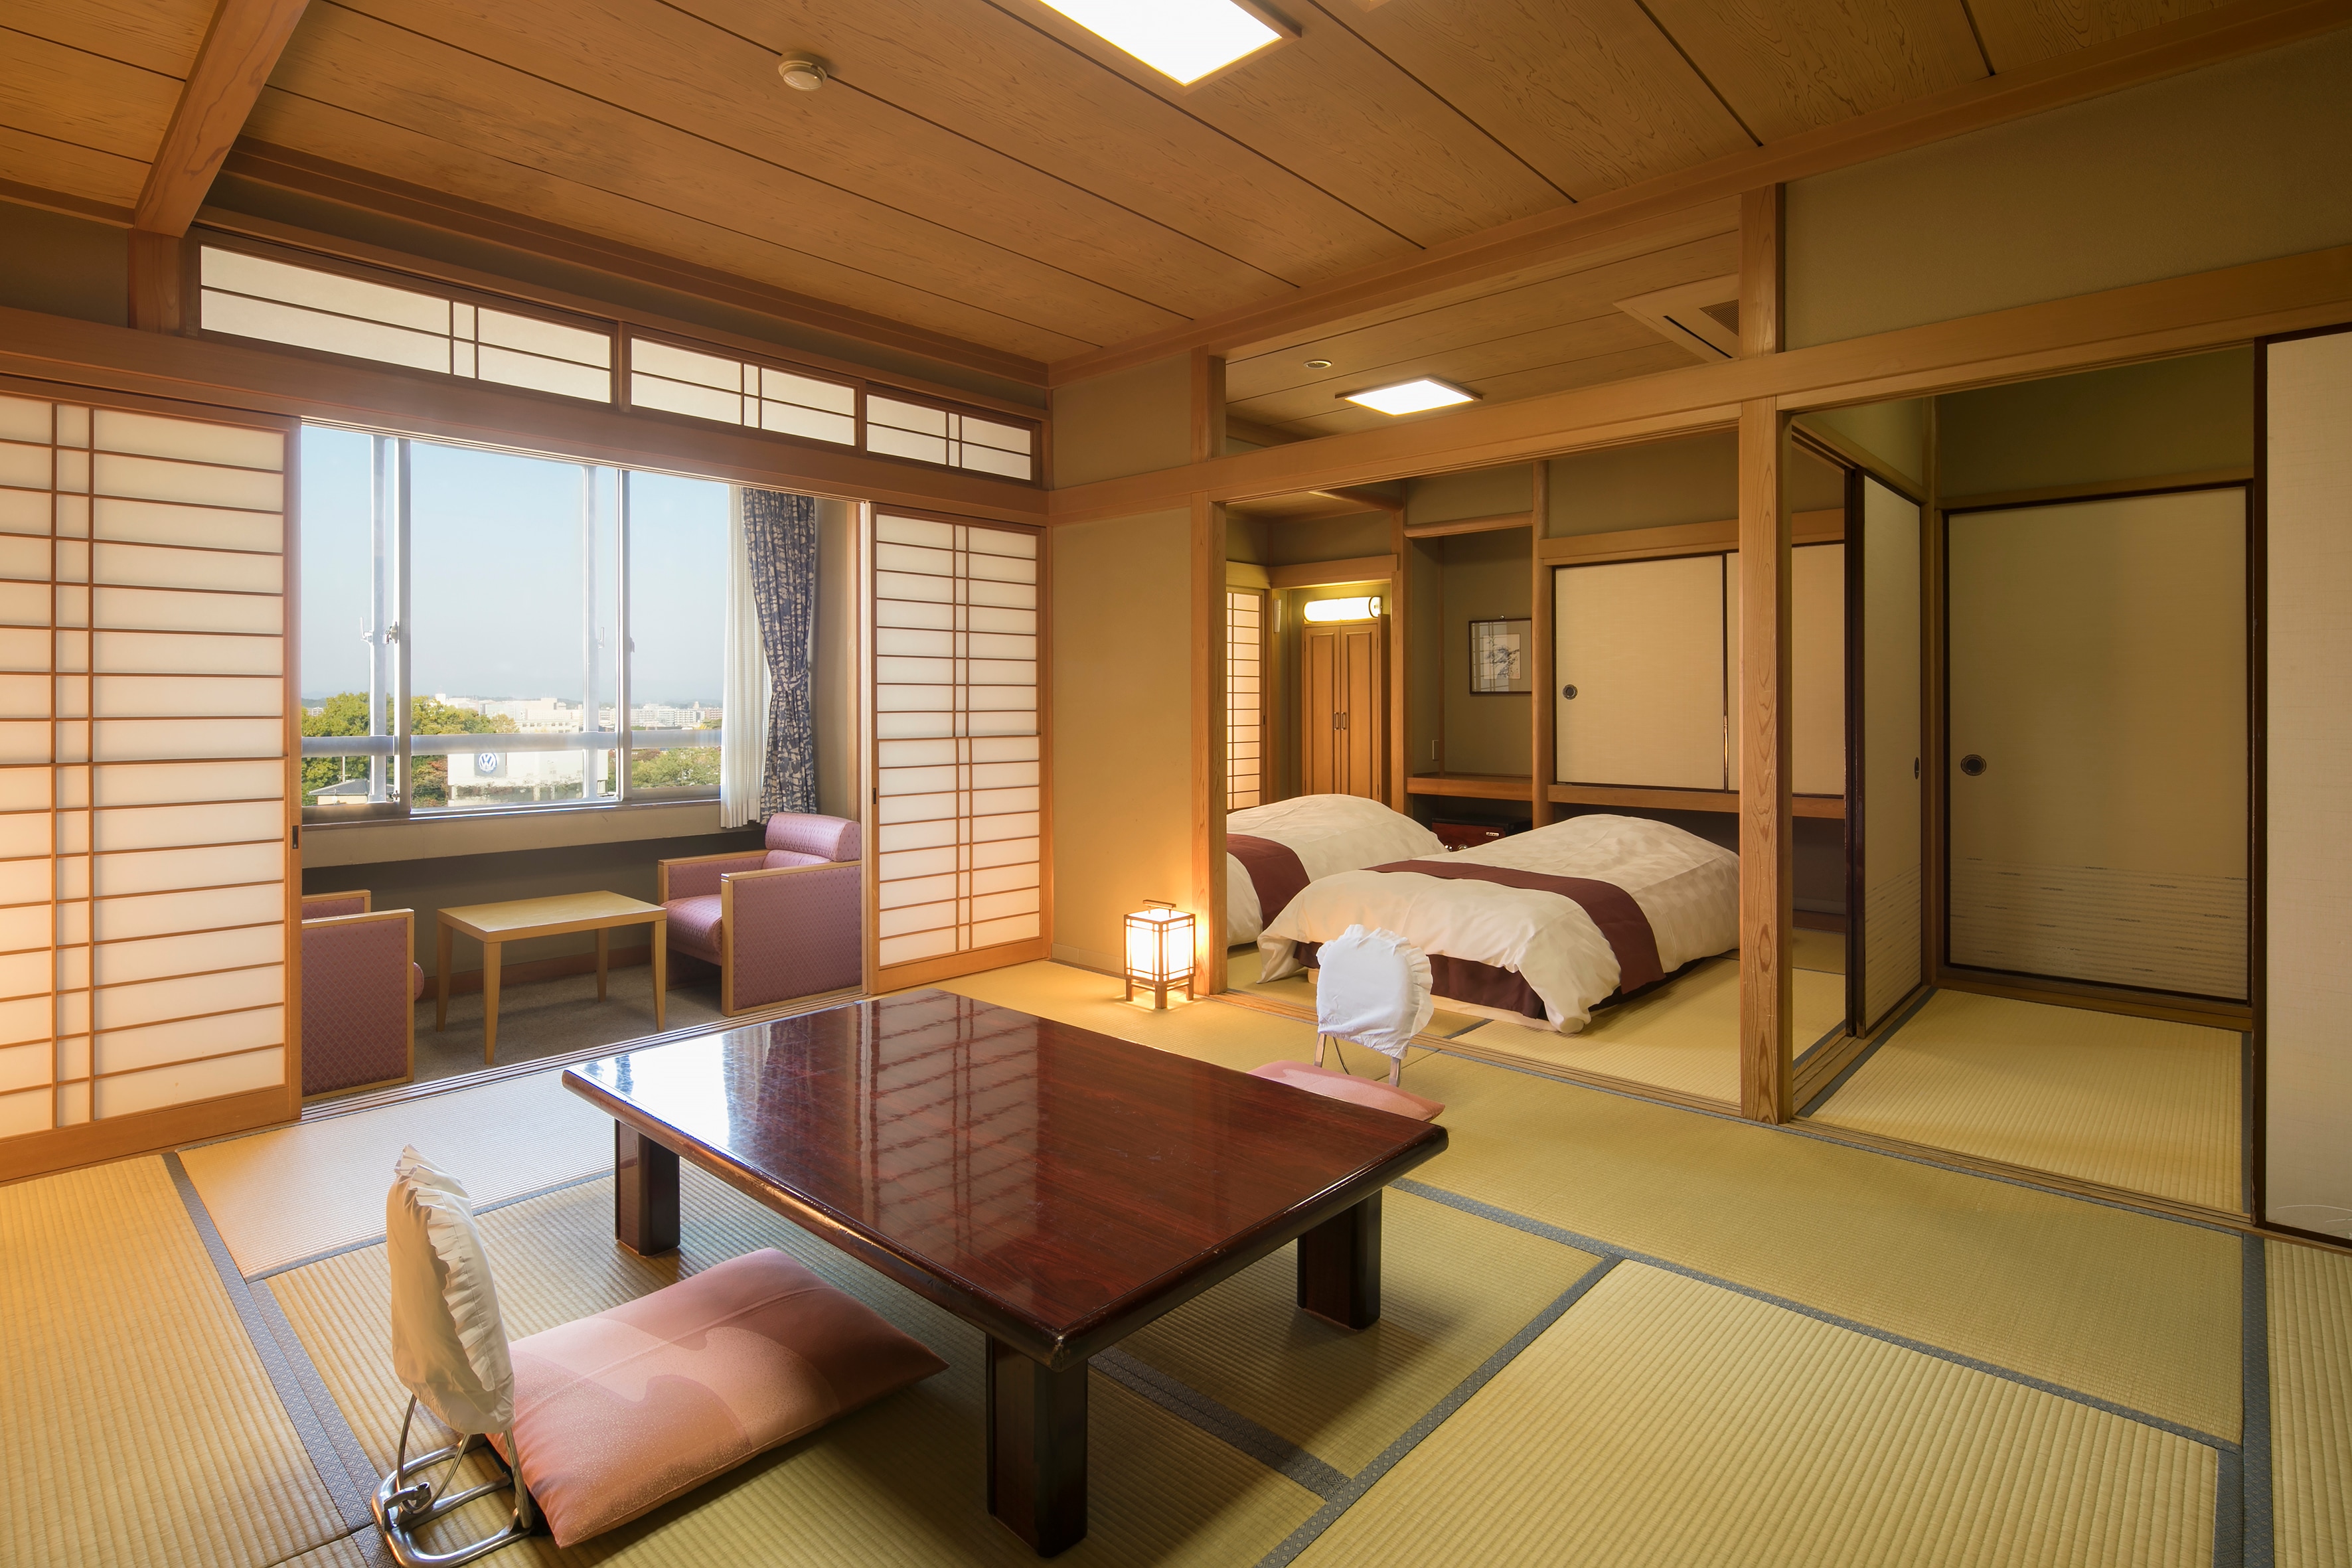 Room: West Building Bed ROOM (10 + 6 tatami mats, Japanese-style room) Capacity: 2 to 6 people, futons are available from the 3rd person